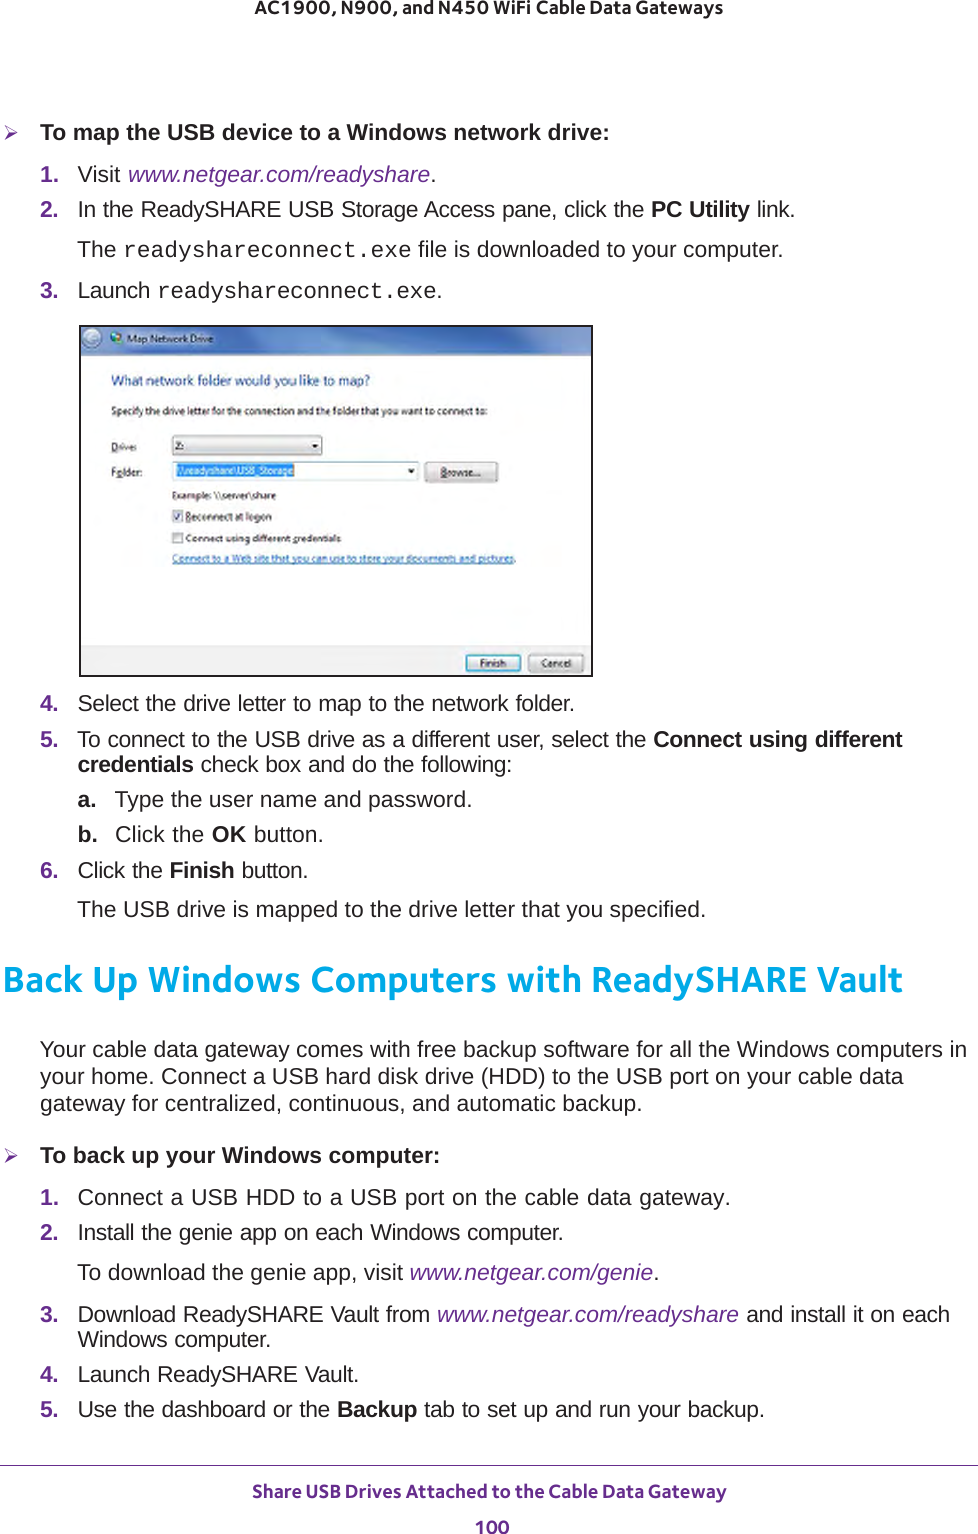 Share USB Drives Attached to the Cable Data Gateway 100AC1900, N900, and N450 WiFi Cable Data Gateways To map the USB device to a Windows network drive: 1.  Visit www.netgear.com/readyshare.2.  In the ReadySHARE USB Storage Access pane, click the PC Utility link.The readyshareconnect.exe file is downloaded to your computer.3.  Launch readyshareconnect.exe.4.  Select the drive letter to map to the network folder.5.  To connect to the USB drive as a different user, select the Connect using different credentials check box and do the following:a. Type the user name and password.b.  Click the OK button.6.  Click the Finish button.The USB drive is mapped to the drive letter that you specified.Back Up Windows Computers with ReadySHARE VaultYour cable data gateway comes with free backup software for all the Windows computers in your home. Connect a USB hard disk drive (HDD) to the USB port on your cable data gateway for centralized, continuous, and automatic backup.To back up your Windows computer:1.  Connect a USB HDD to a USB port on the cable data gateway.2.  Install the genie app on each Windows computer.To download the genie app, visit www.netgear.com/genie.3.  Download ReadySHARE Vault from www.netgear.com/readyshare and install it on each Windows computer.4.  Launch ReadySHARE Vault.5.  Use the dashboard or the Backup tab to set up and run your backup.